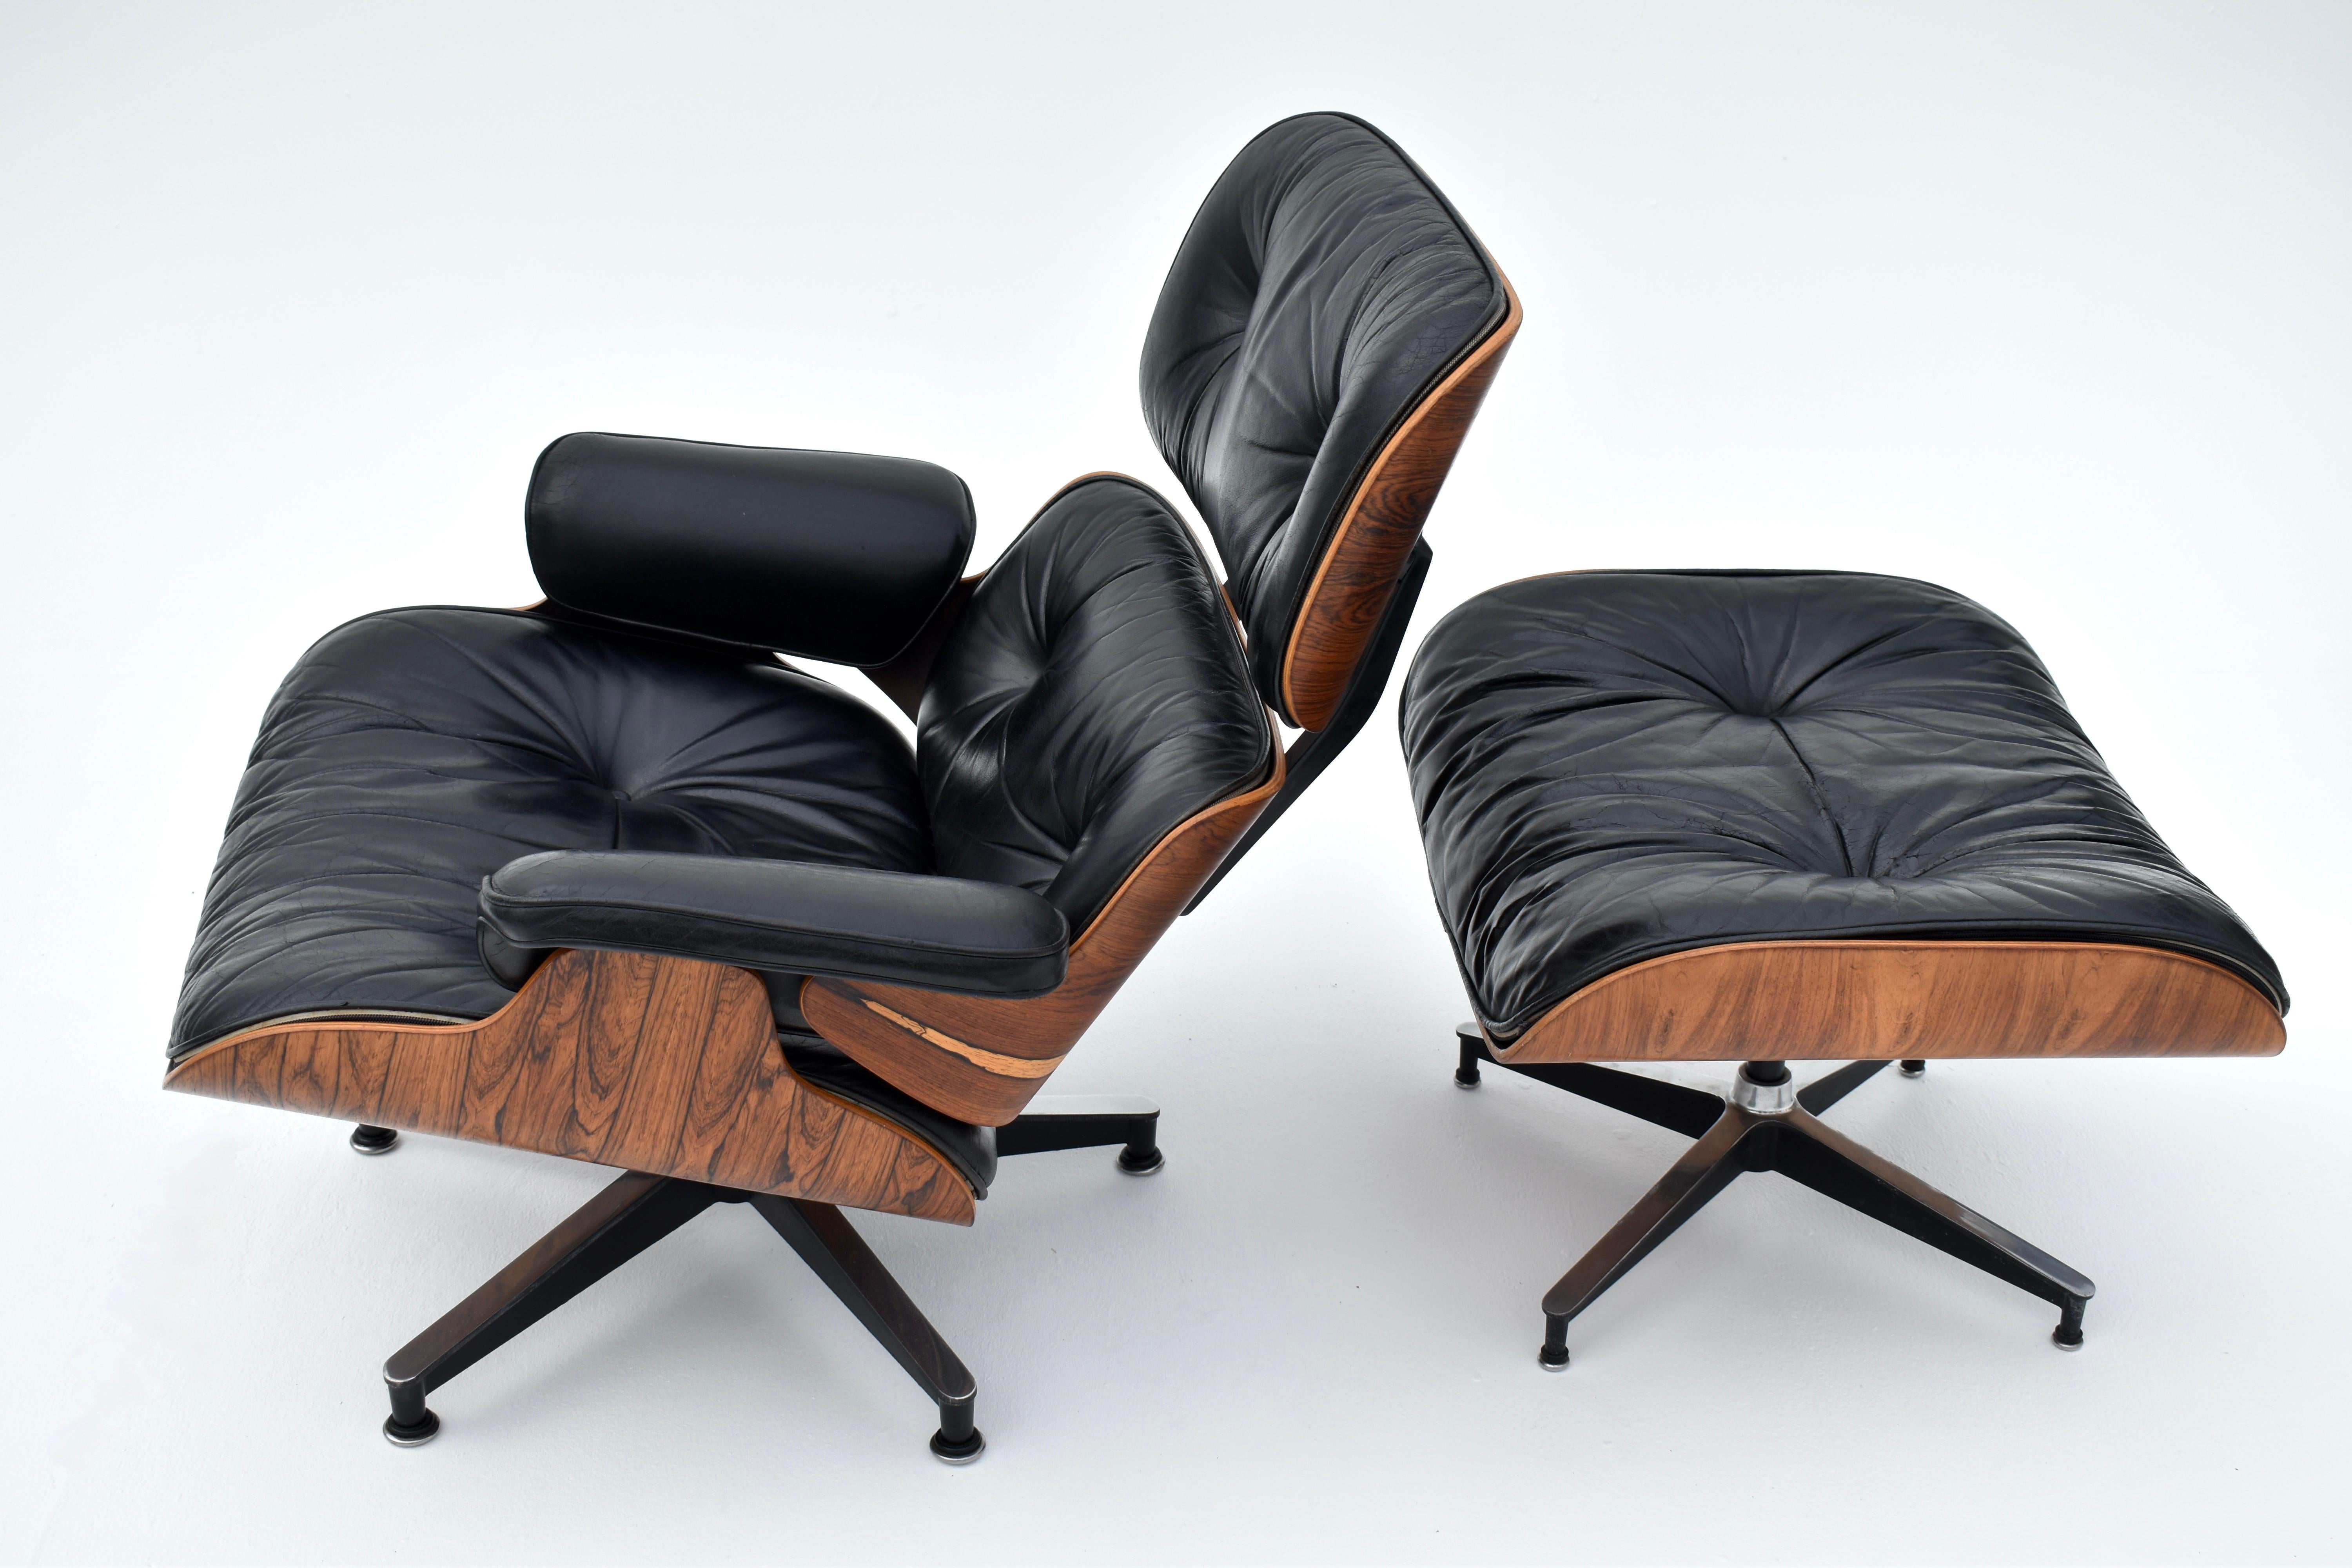 Mid-20th Century Original 1960's Production Eames Lounge Chair & Ottoman For Herman Miller For Sale